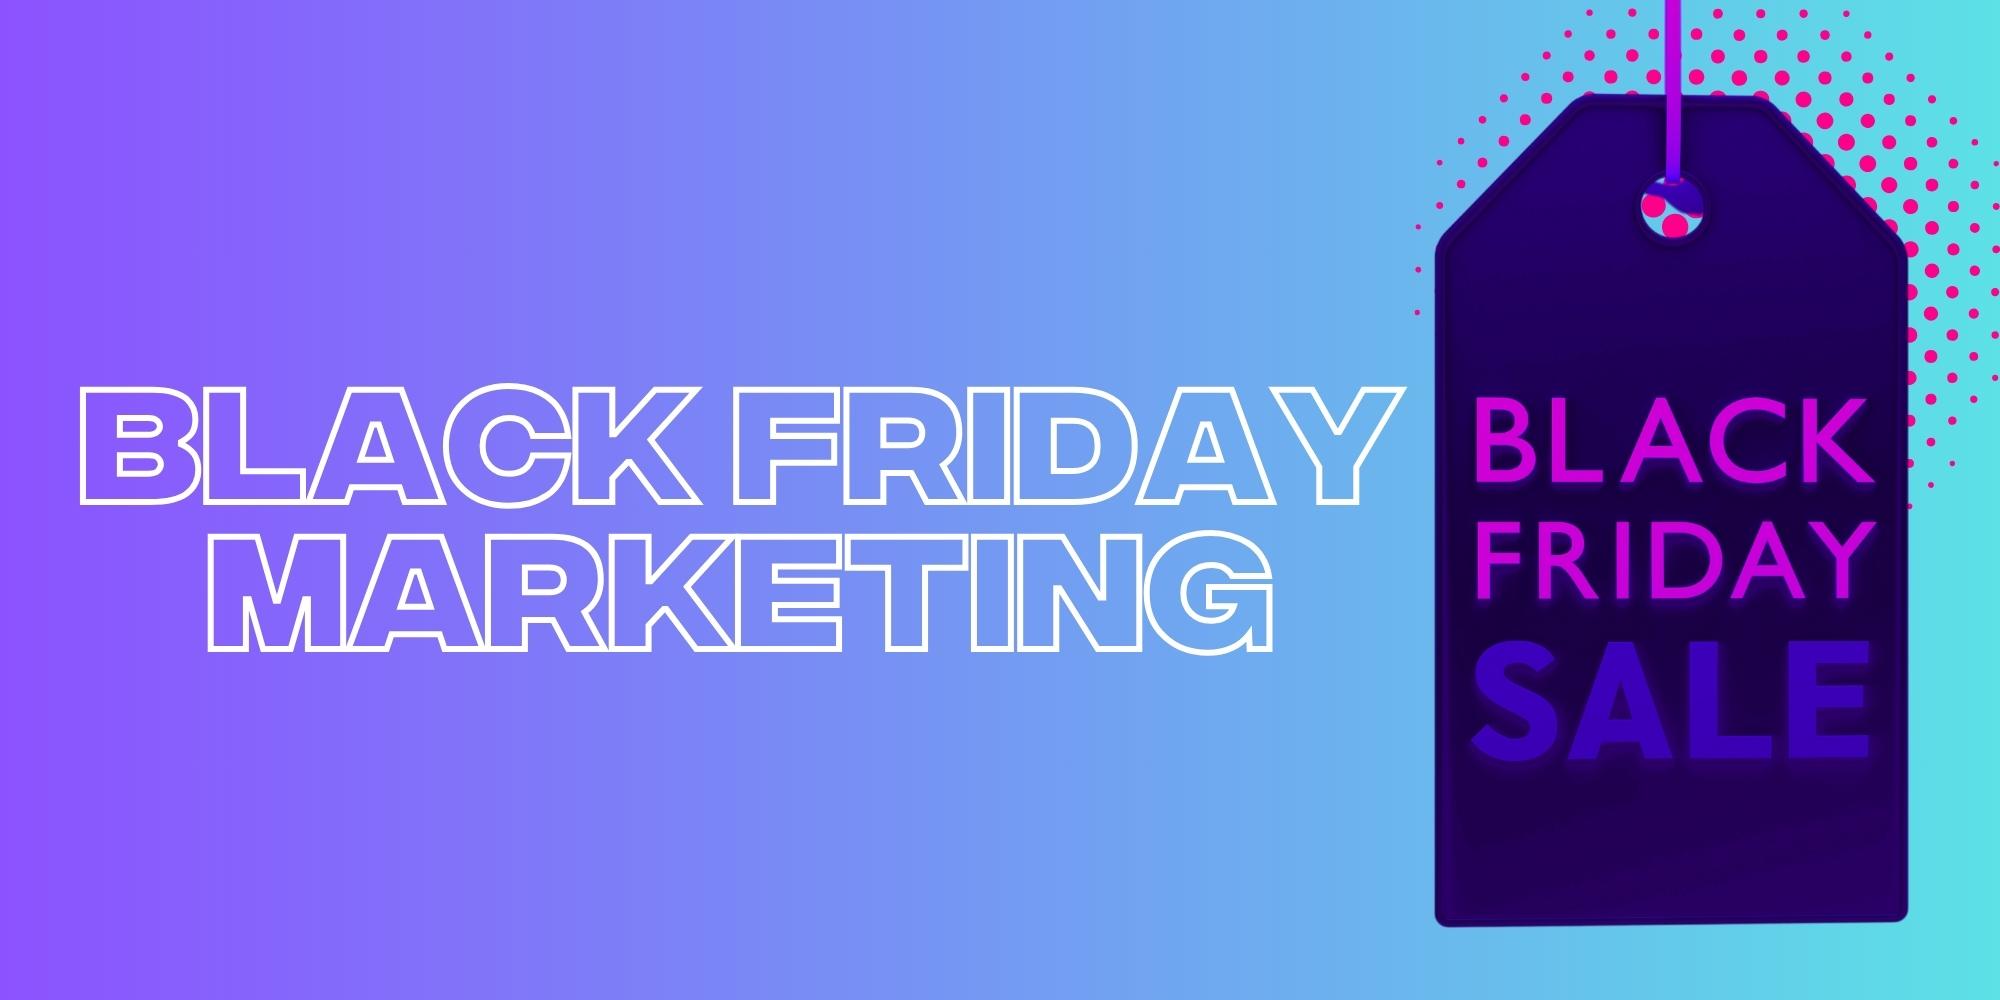 Black Friday Marketing Ideas: Set Yourself Up For Success Socially